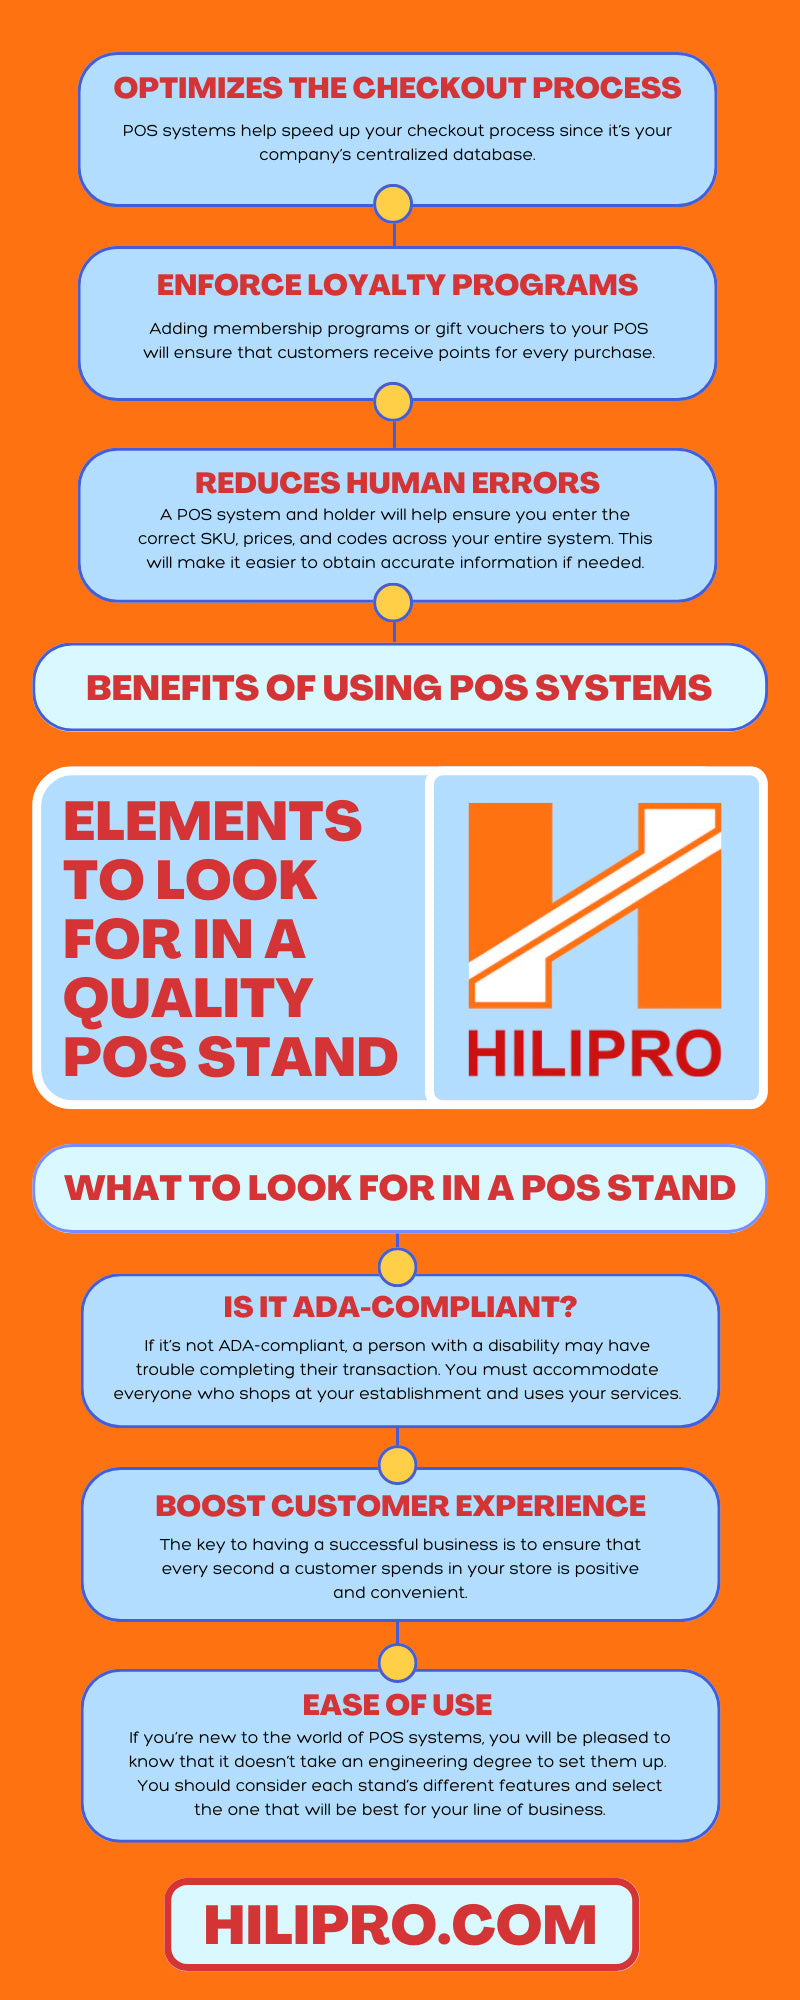 What Elements To Look For in a Quality POS Stand